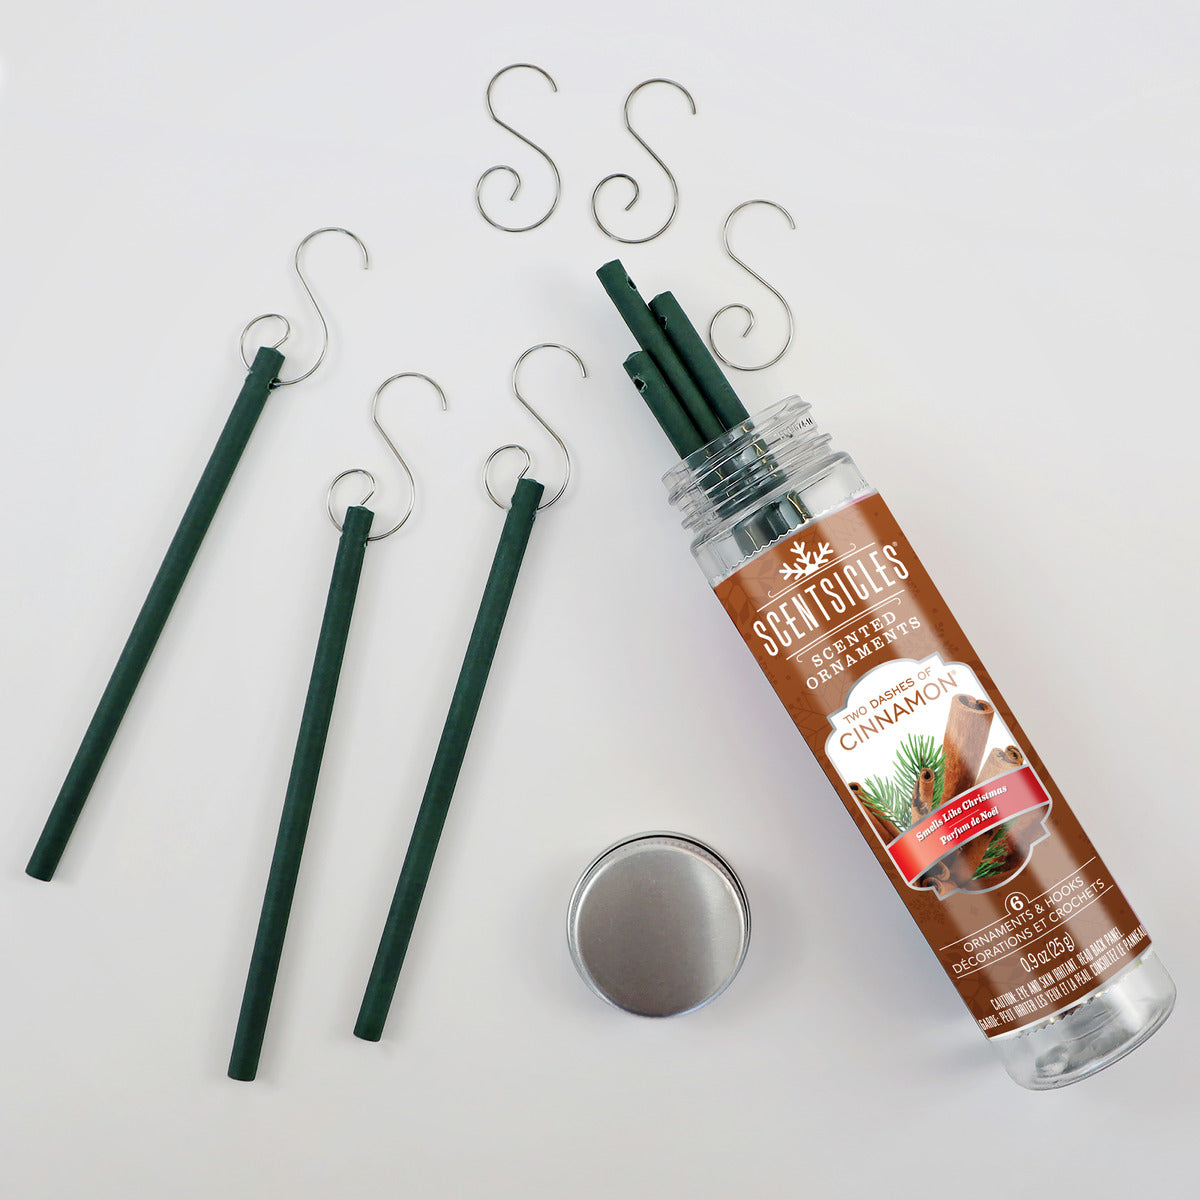 Scented Ornaments, 2-Pack- 6ct Bottle, 2 Dashes of Cinnamon, Fragrance-Infused Paper Sticks